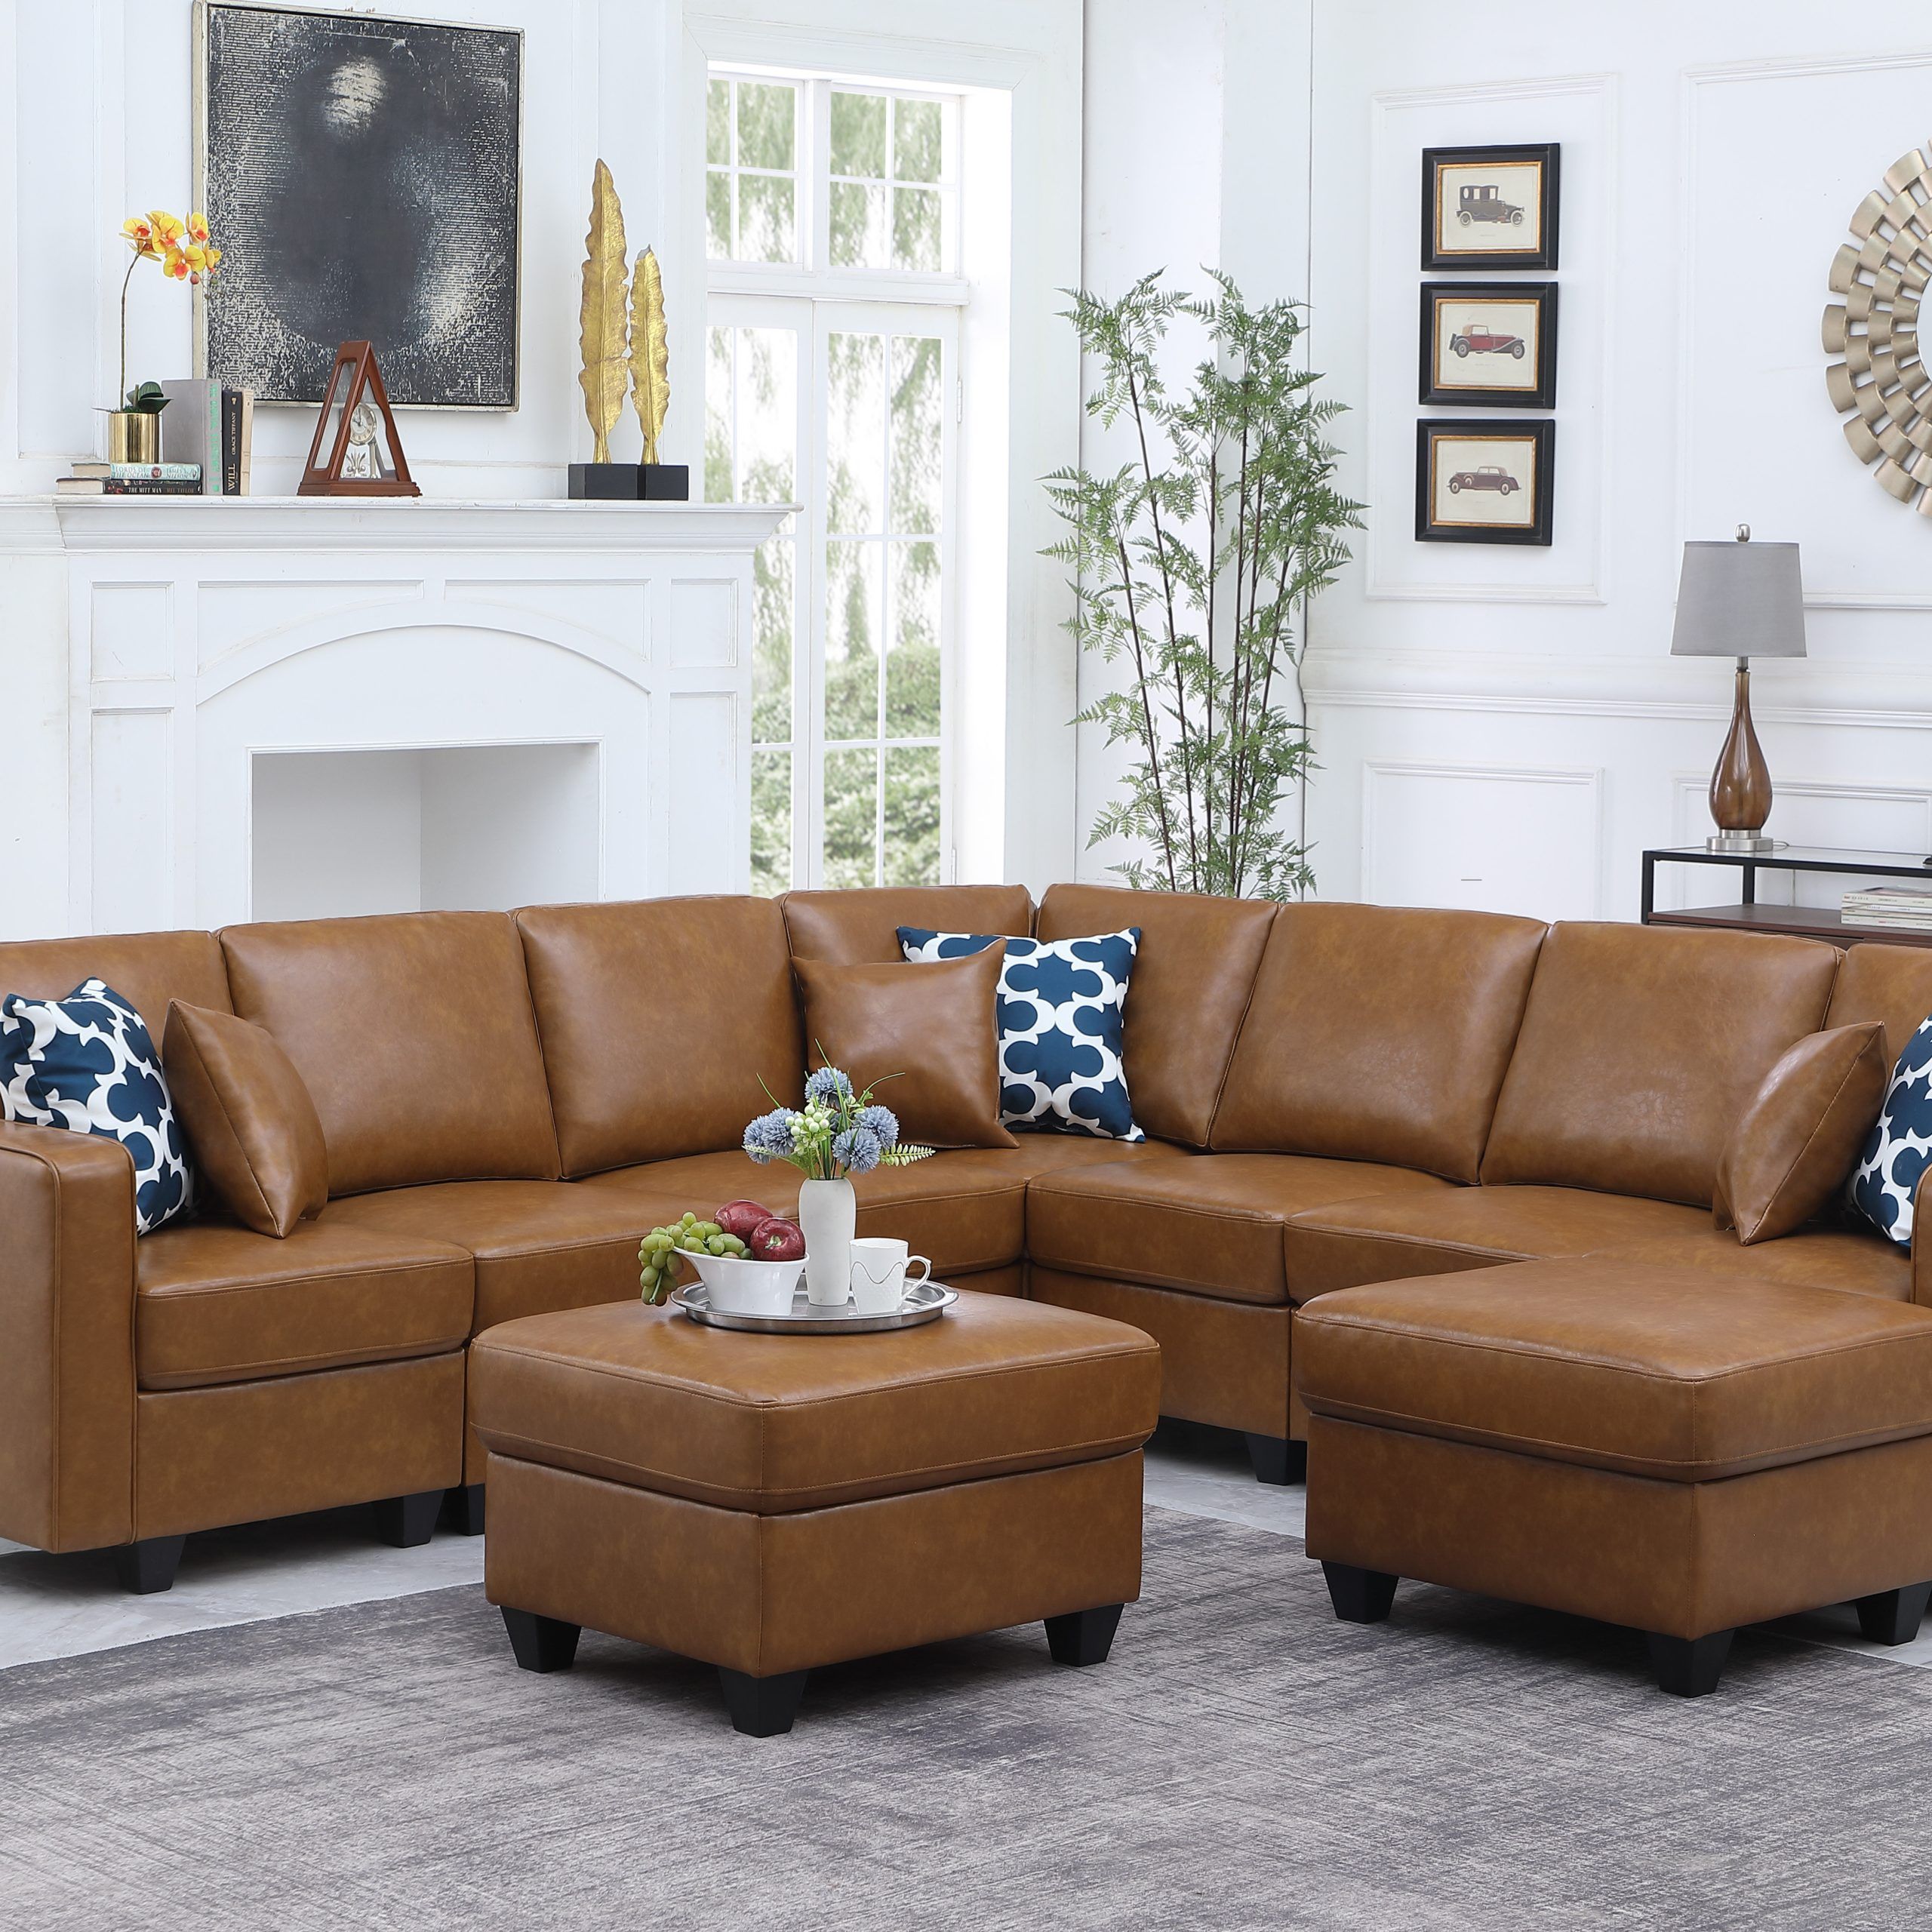 Devion Furniture 9 – Piece Vegan Leather Sectional & Reviews | Wayfair With Regard To Faux Leather Sectional Sofa Sets (Photo 5 of 15)